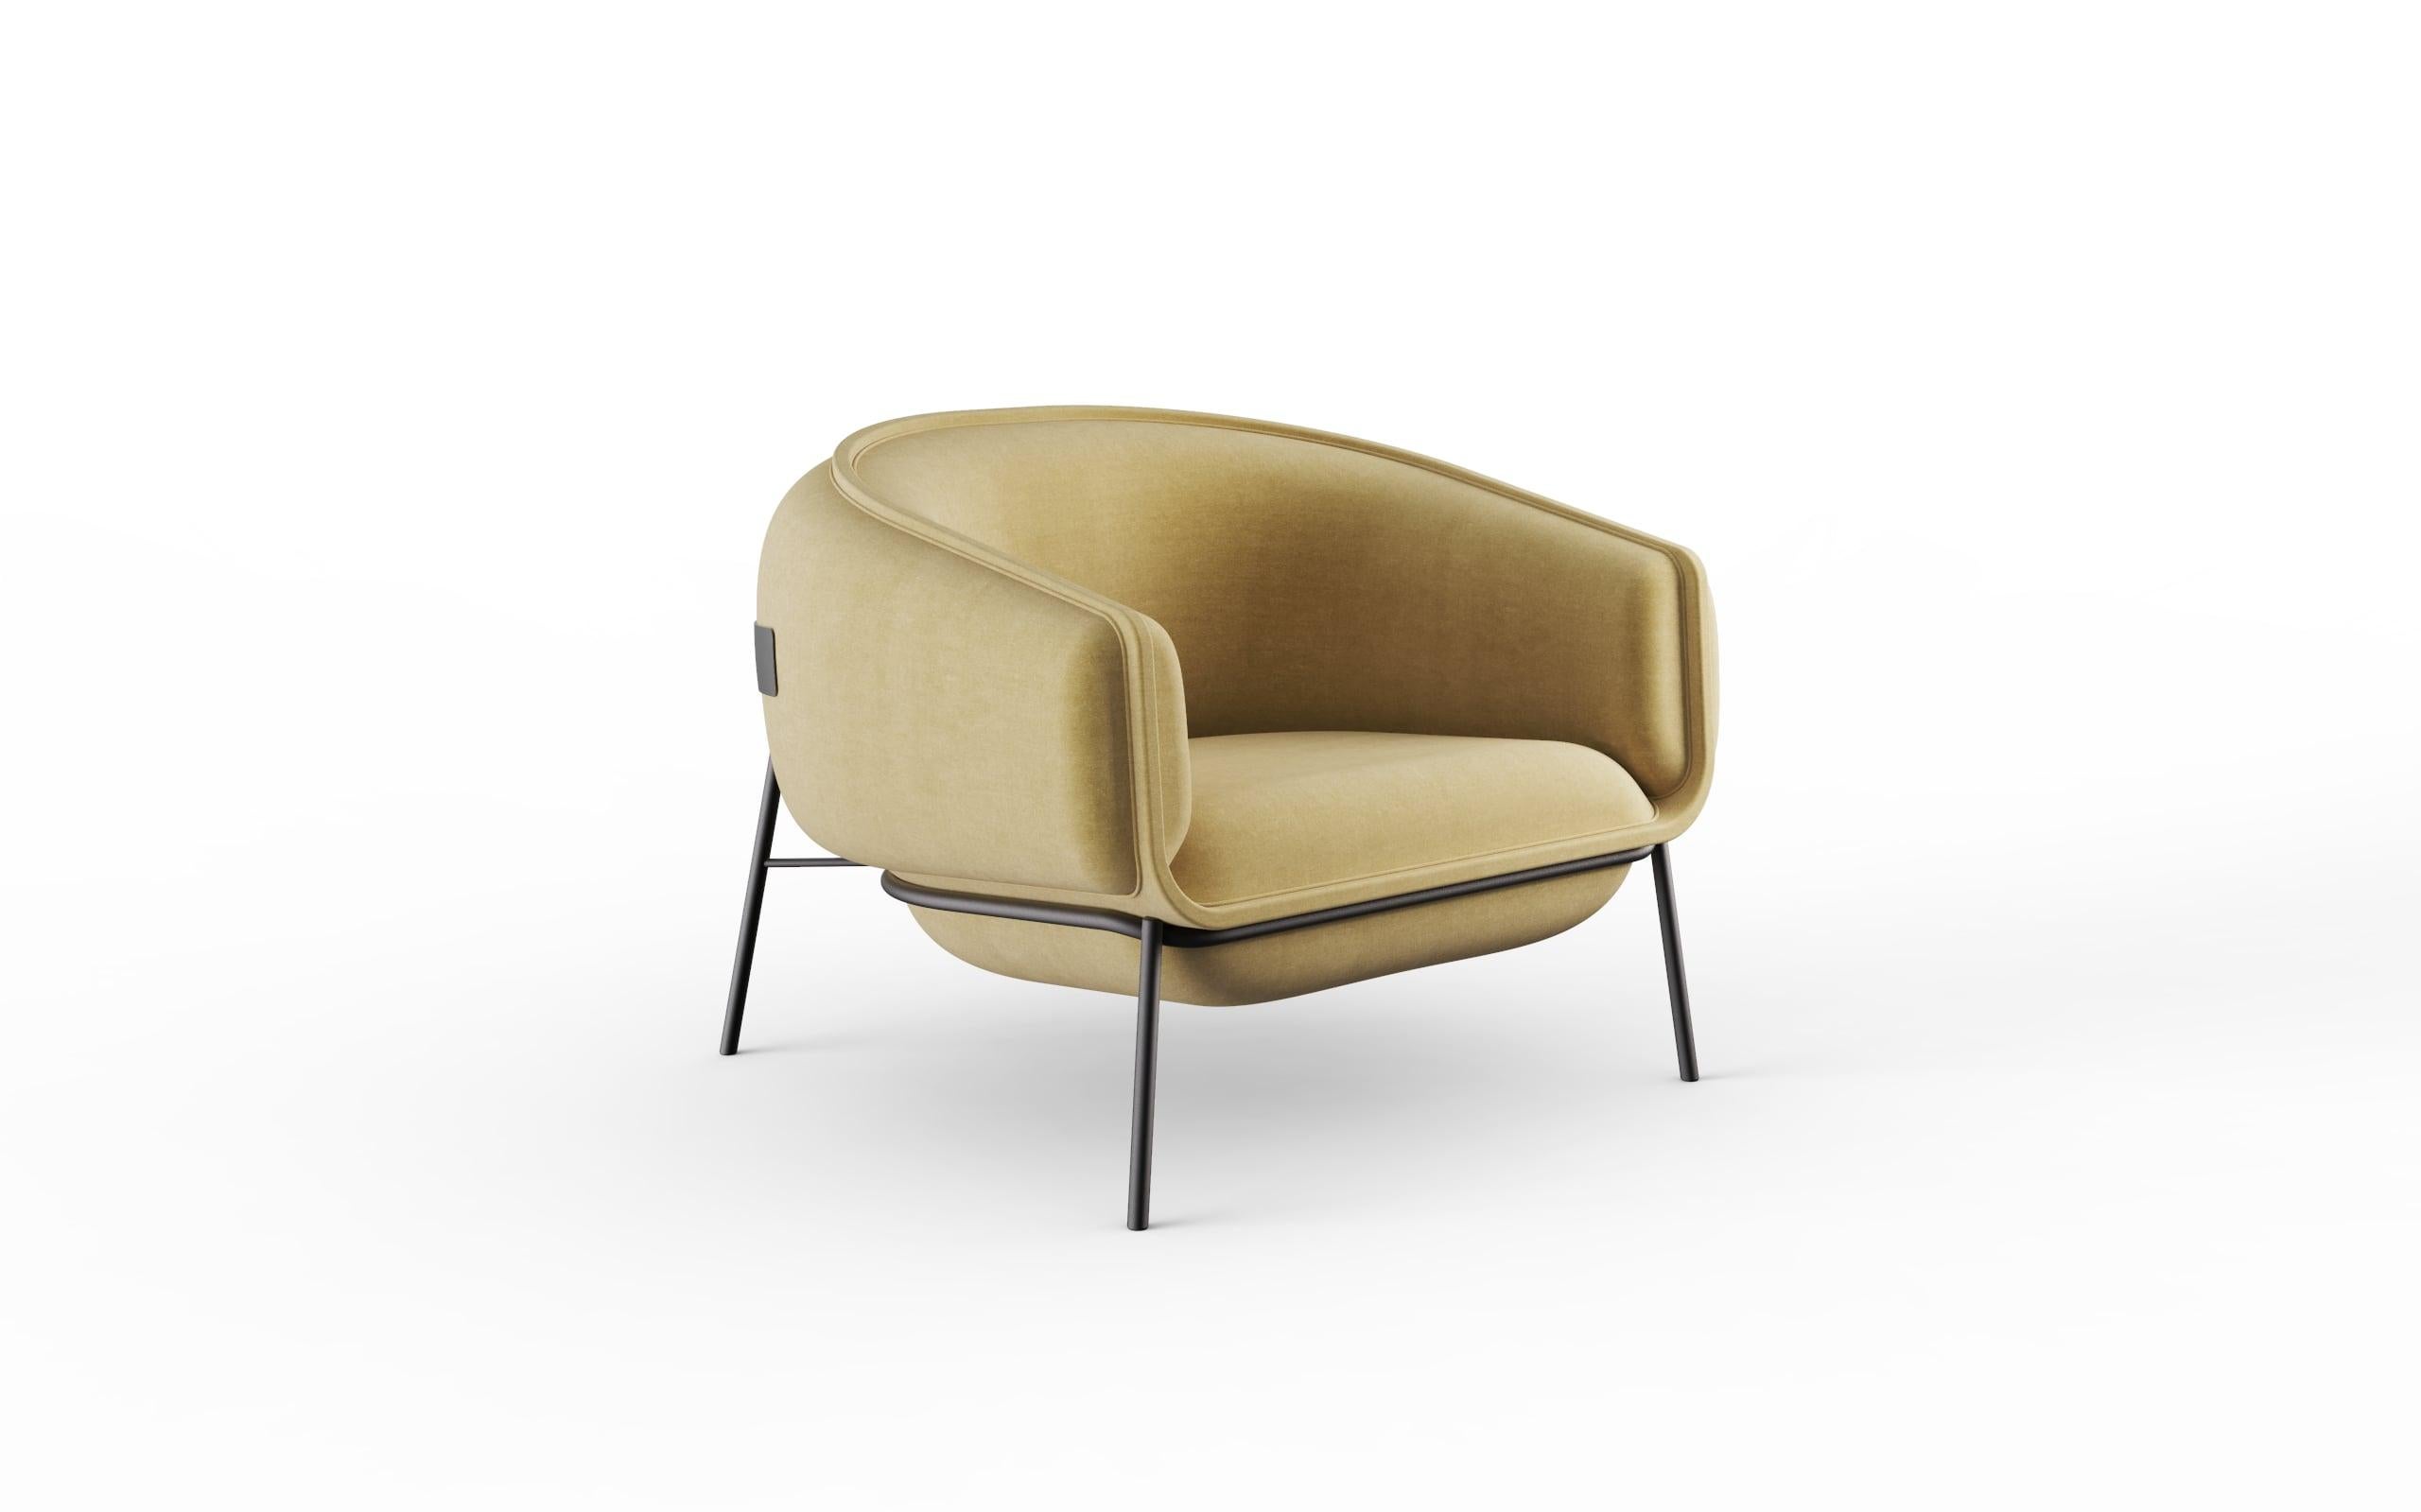 Contemporary fabric Blop armchair
Dimensions: D 78 x W 80 x H 75 cm
Seat height 44 cm
Materials: Top: fabric or leather
Feet: Lacquer metal - choose from metal samples.




  